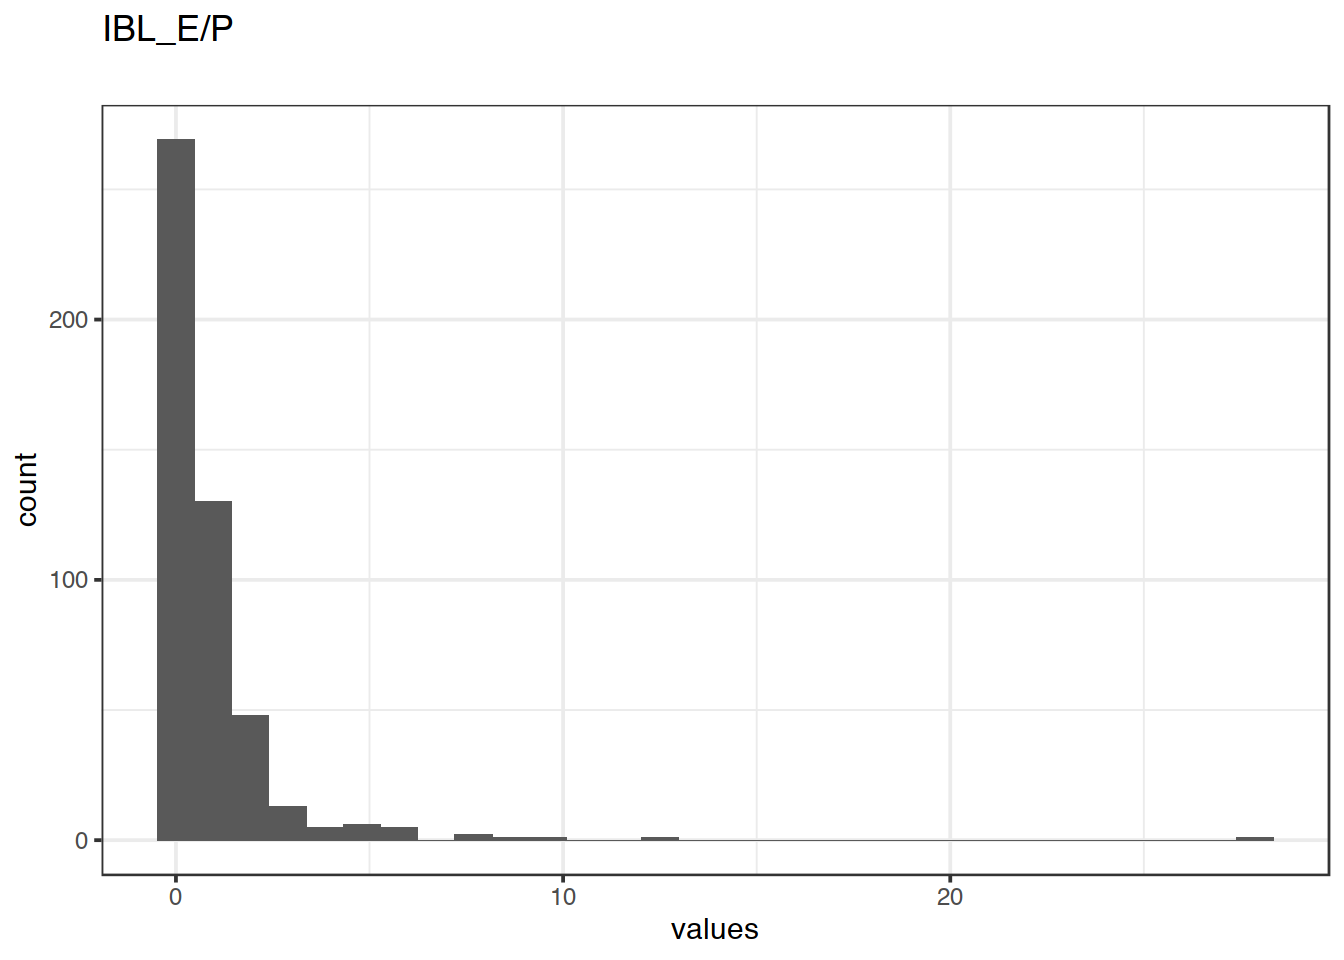 Distribution of values for IBL_E/P